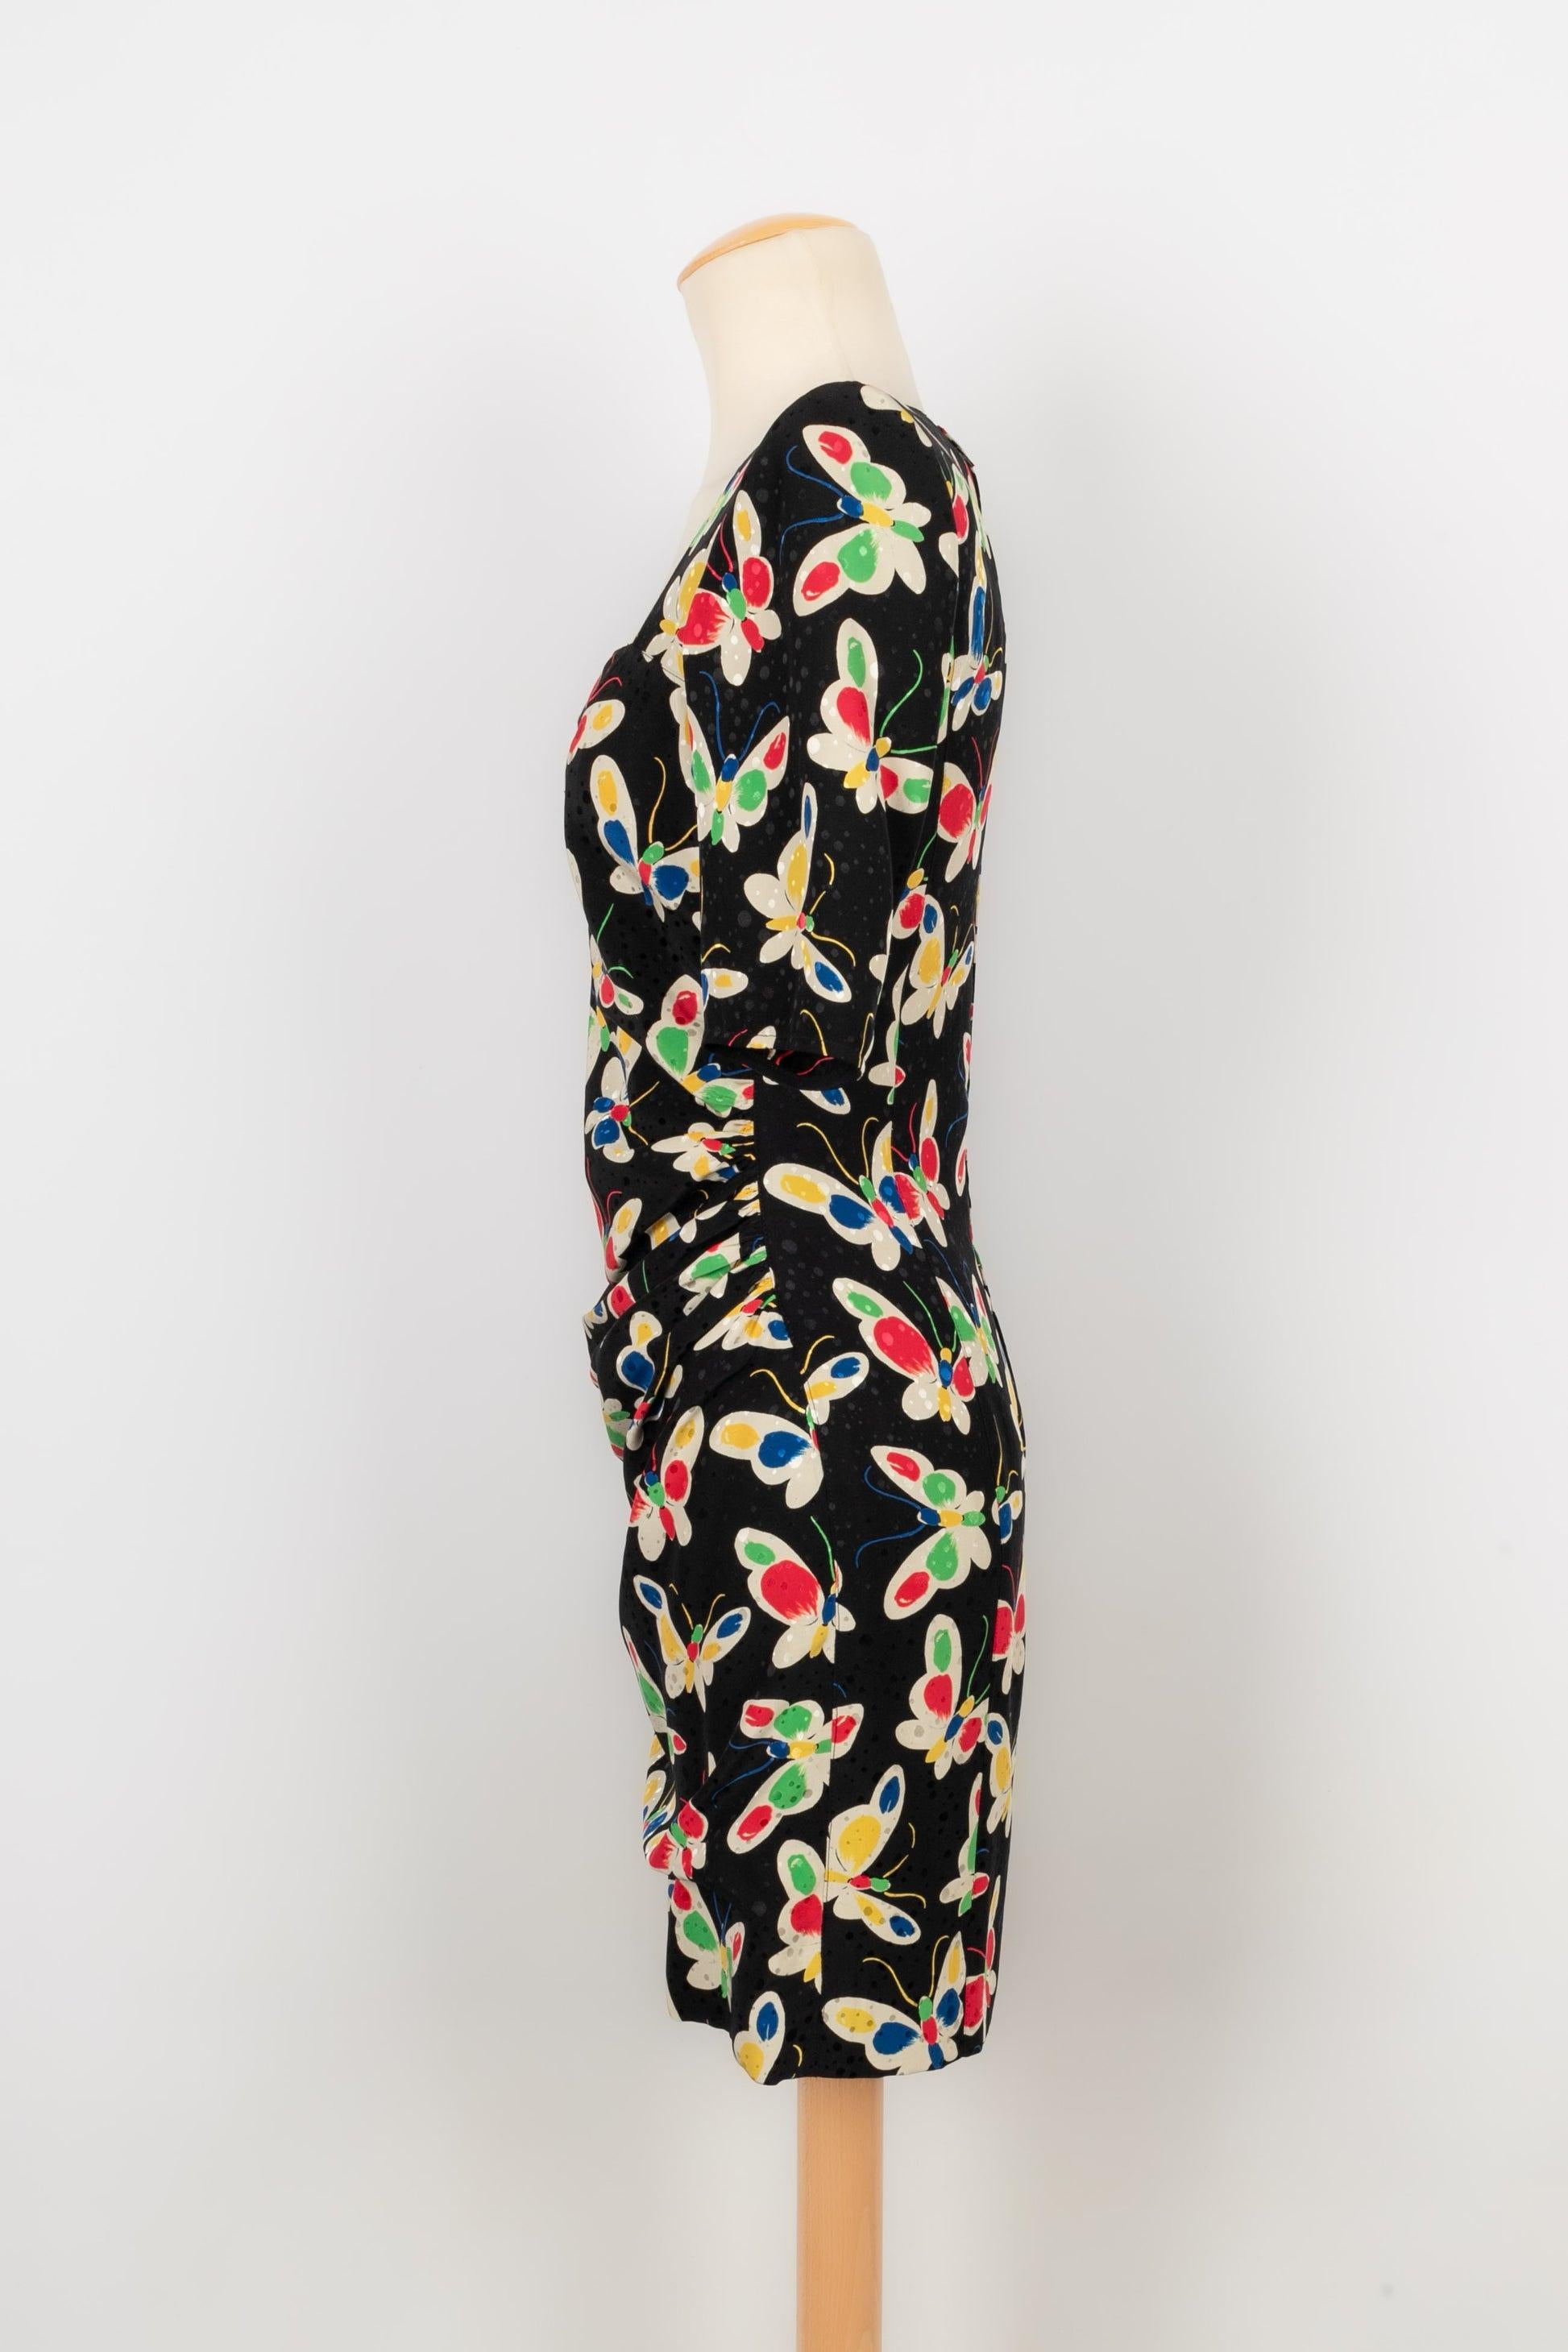 Ungaro - Black silk short dress printed with multicolored flowers. No size nor composition label, it fits a 36FR/38FR.

Additional information:
Condition: Very good condition
Dimensions: Shoulder width: 40 cm - Chest: 42 cm - Sleeve length: 31 cm -